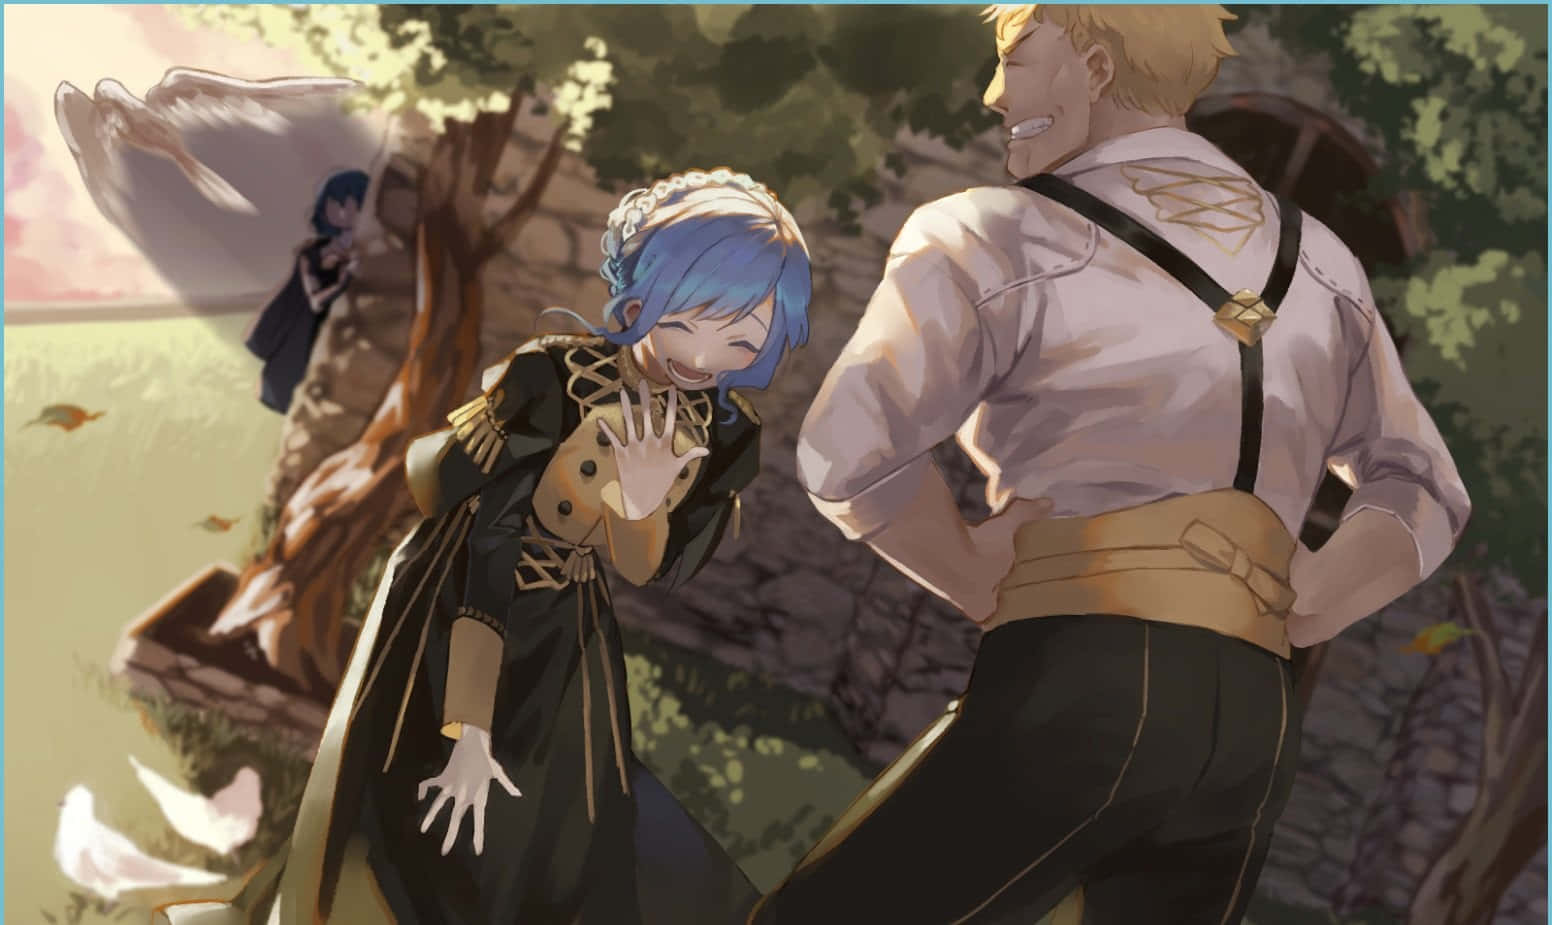 Bring the Three Houses together to battle Fate in Fire Emblem Three Houses